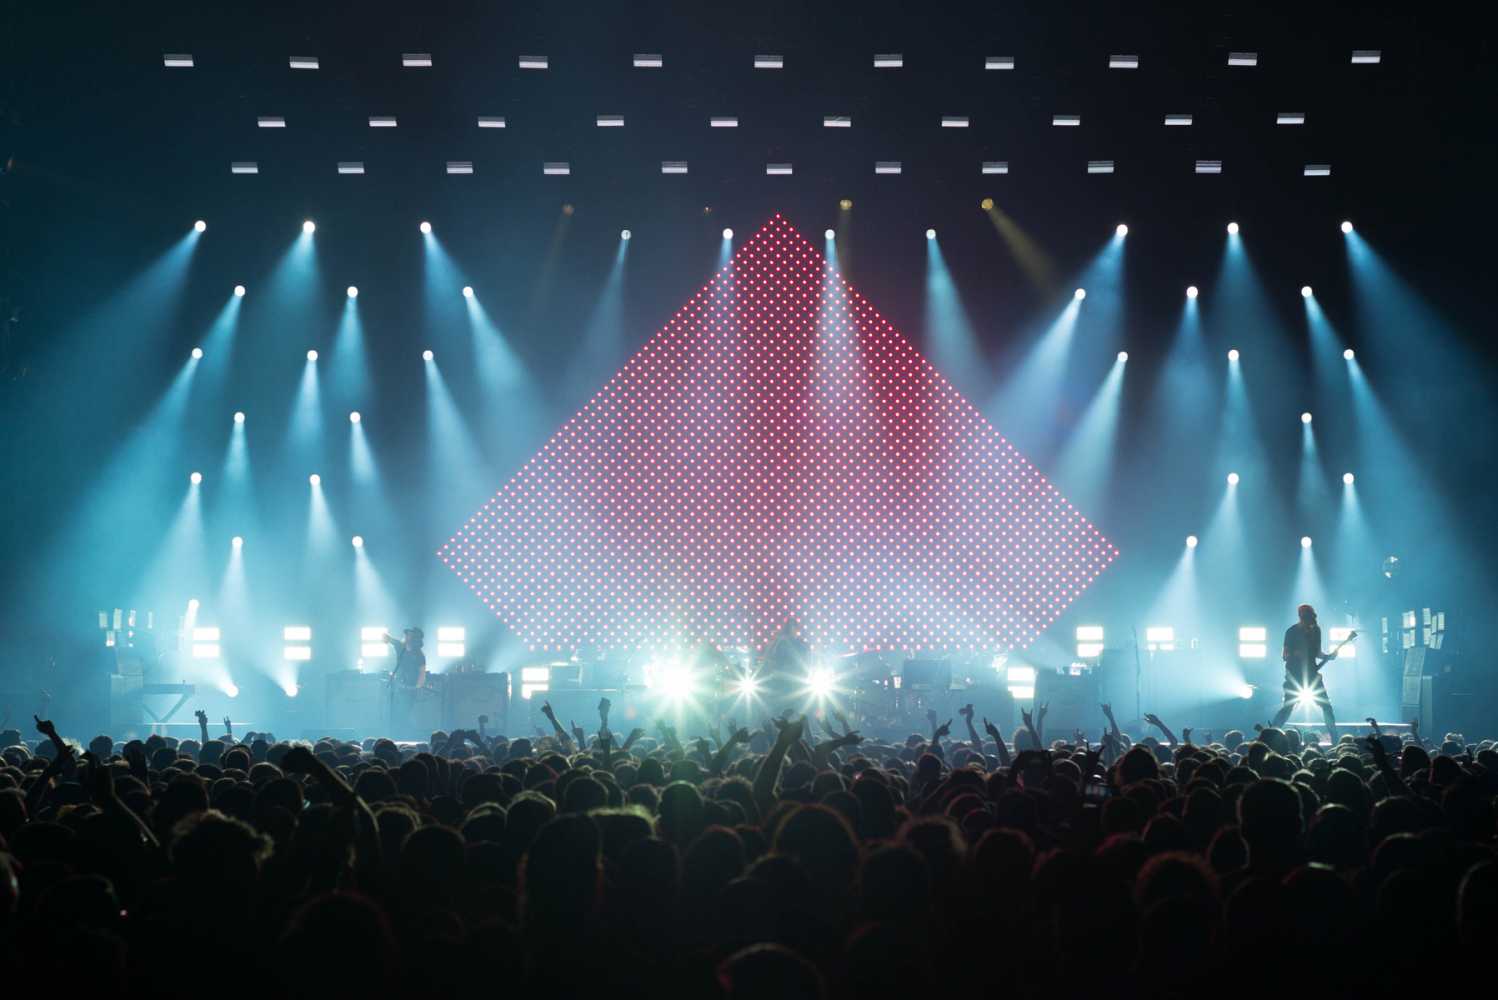 Rob Sinclair’s creative design for System of a Down’s tour contained over 800 individually controlled elements